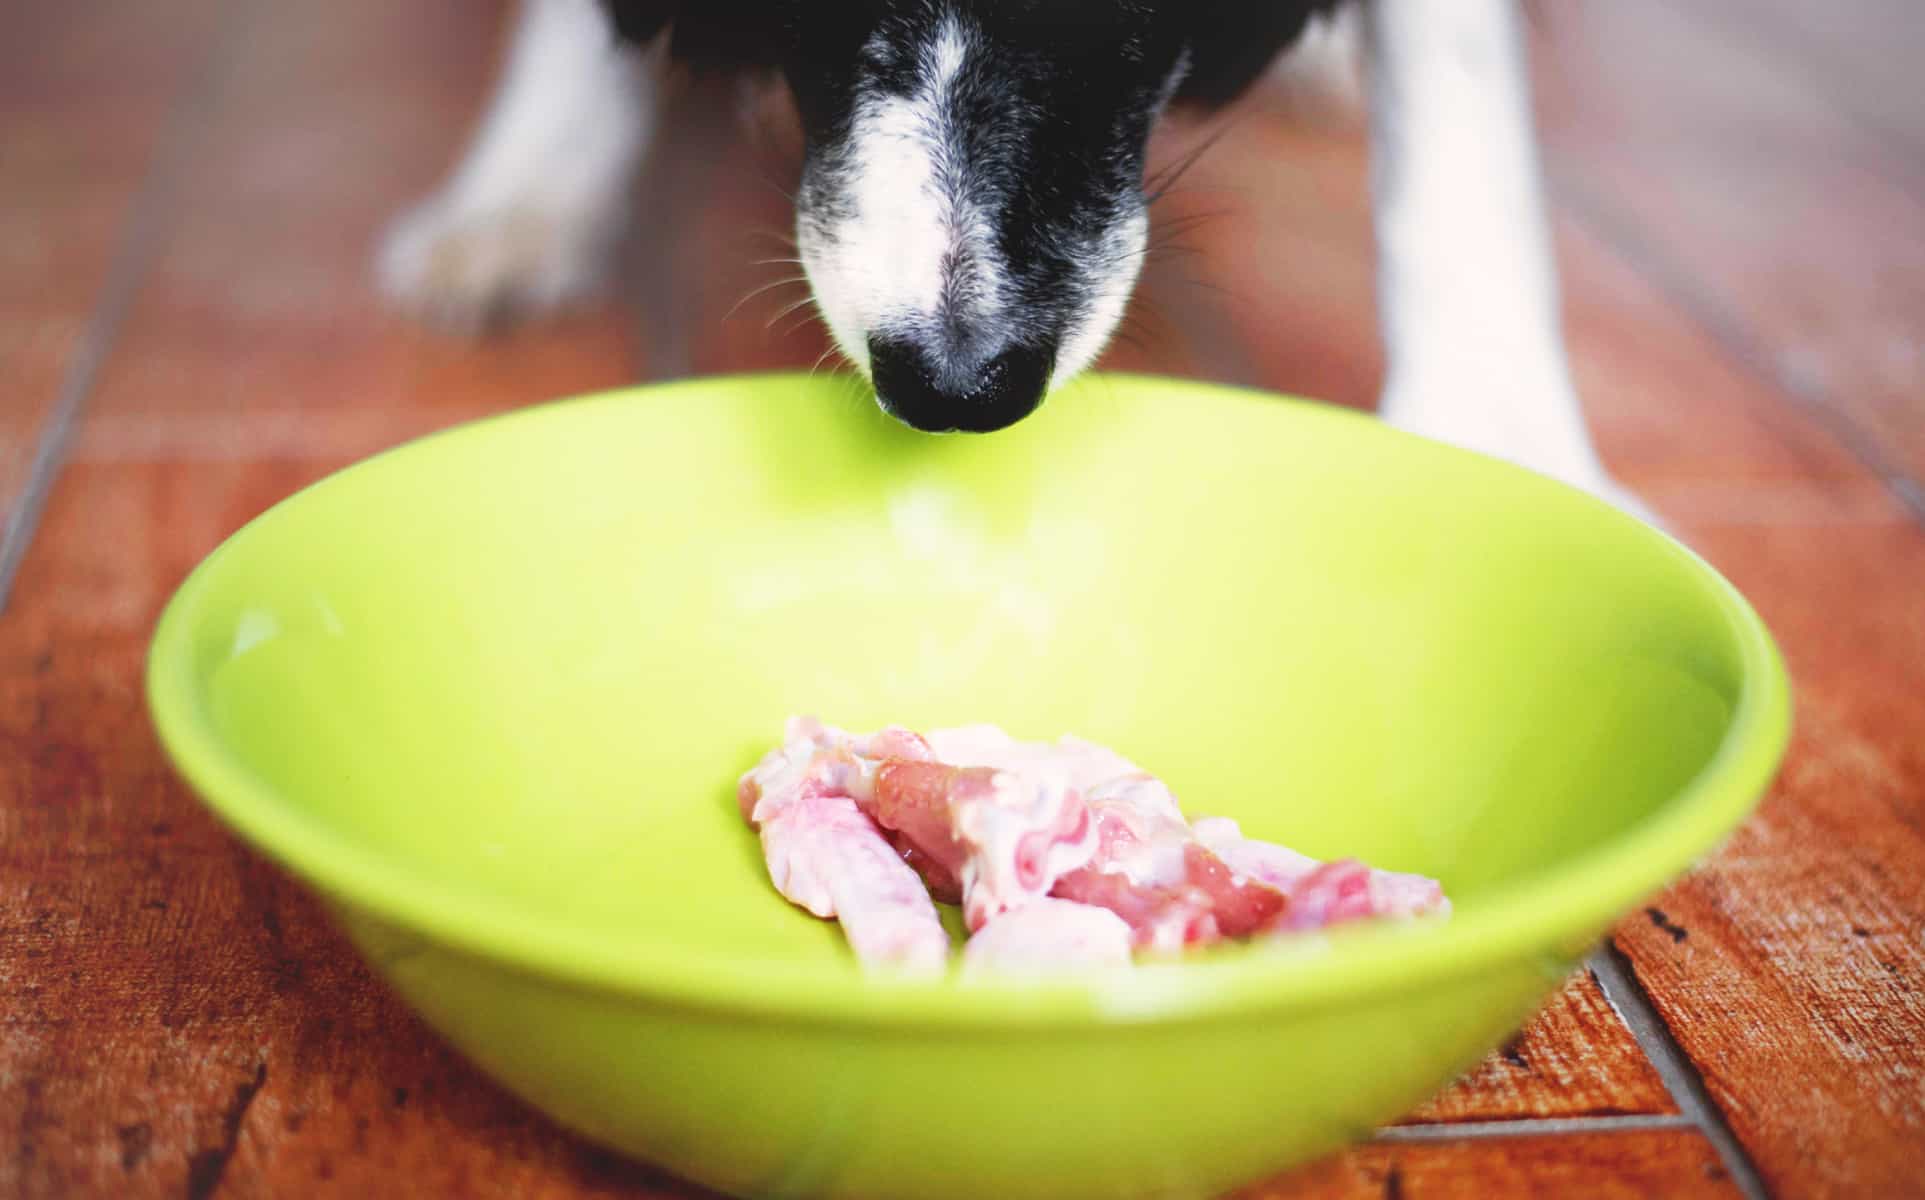 The Sniffing Dog. Cute Black and White Border Collie have a Raw Meat in Green Bowl. Dogs Muzzle.